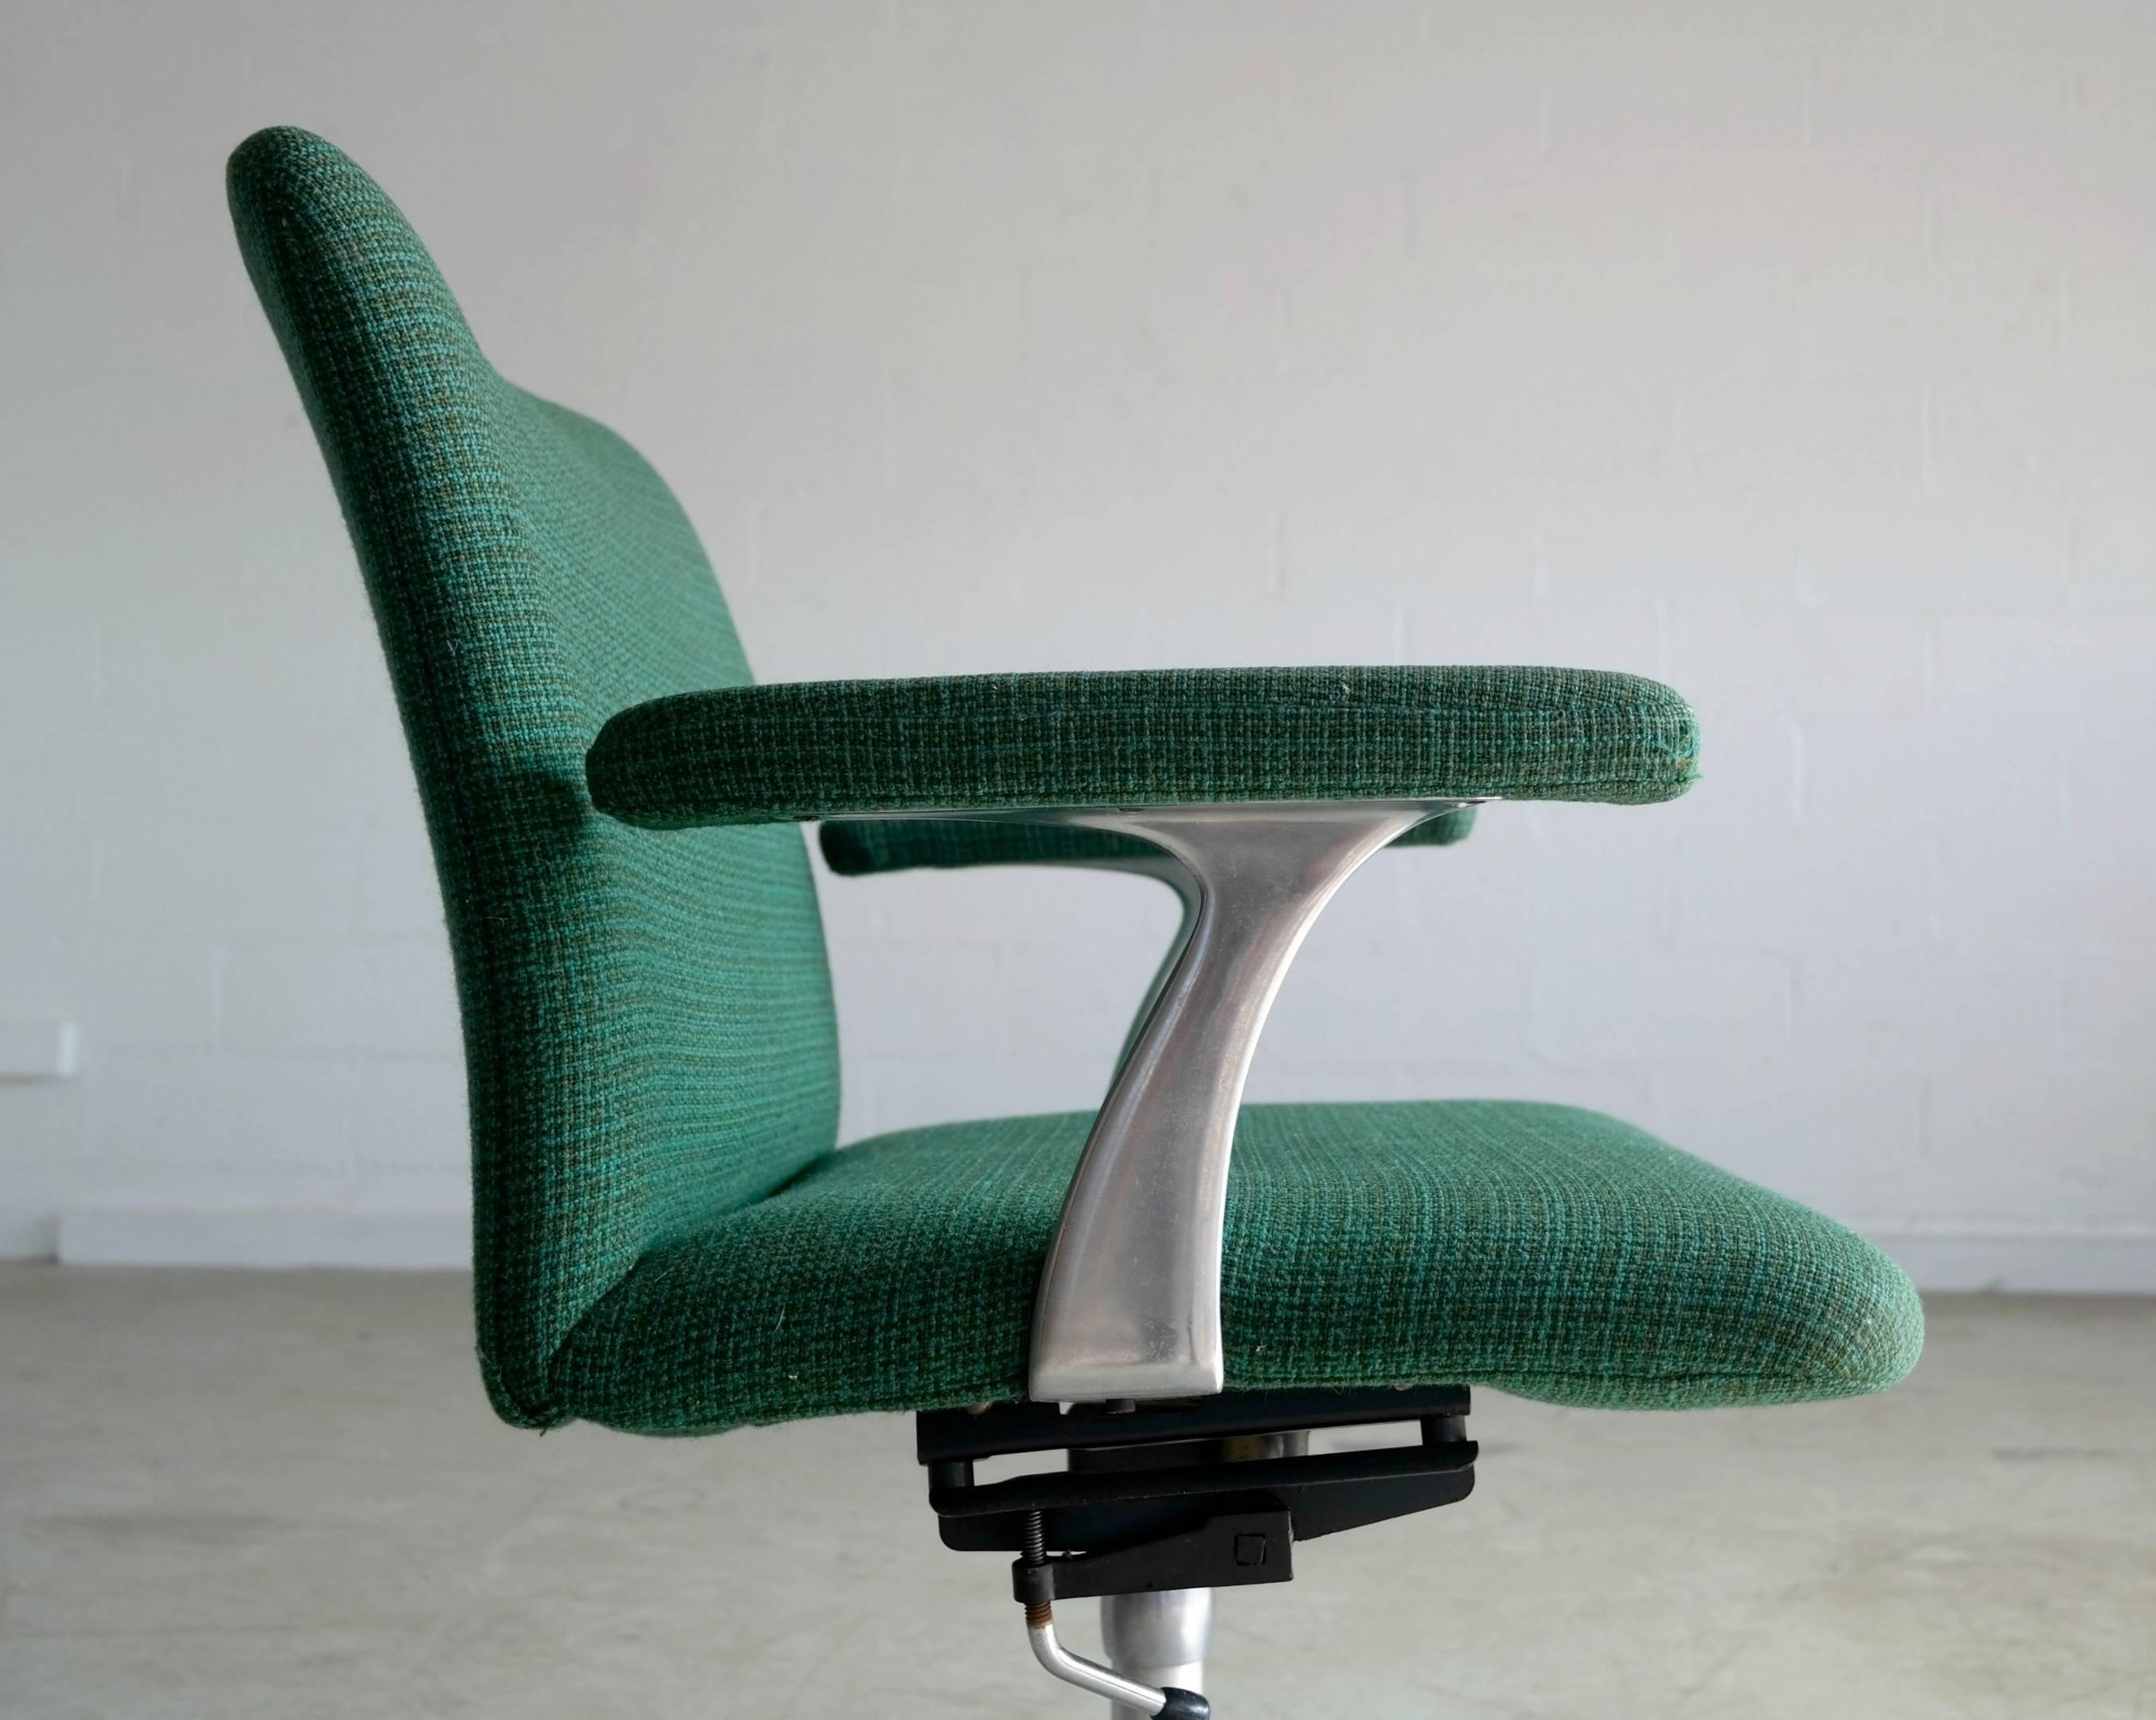 Swivel base office chair model 208 by Cado Systems (Poul Cadovius) with a lockable tilting mechanism. Chair is often attributed to Finn Juhl. Polyester fabric showing appropriate age wear and chair in overall very good condition. 1960s at its best.